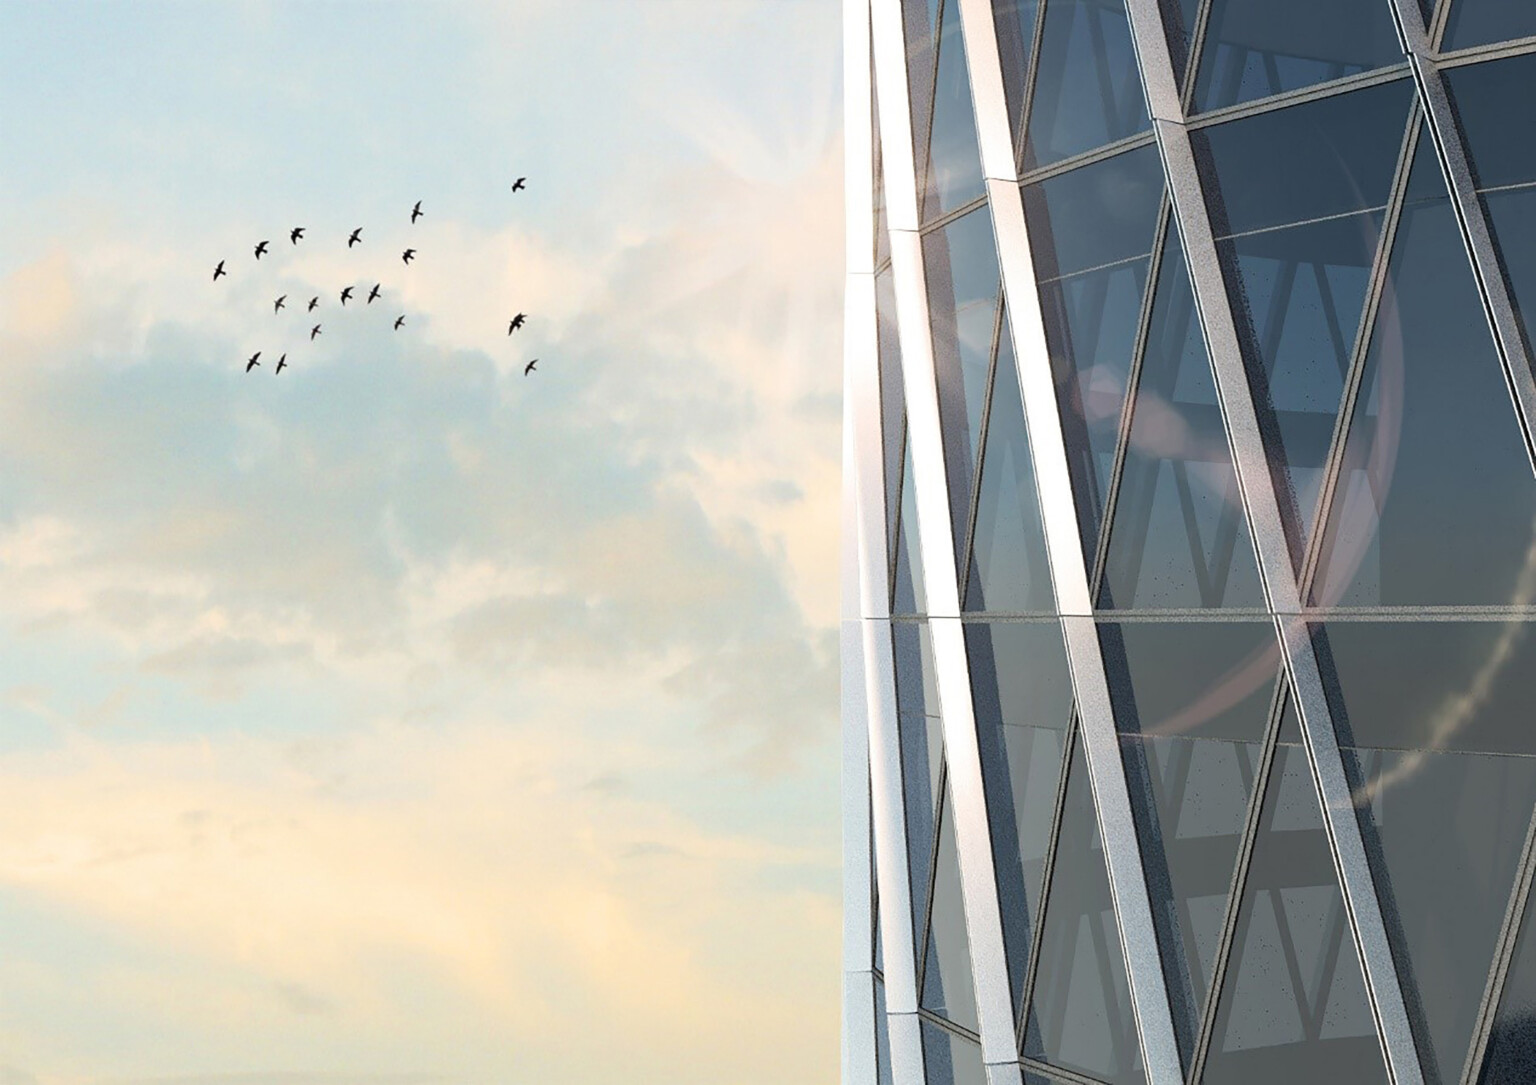 looking up at a glass building with light metal mullions and sun glare reflections against a bright sky with flying birds